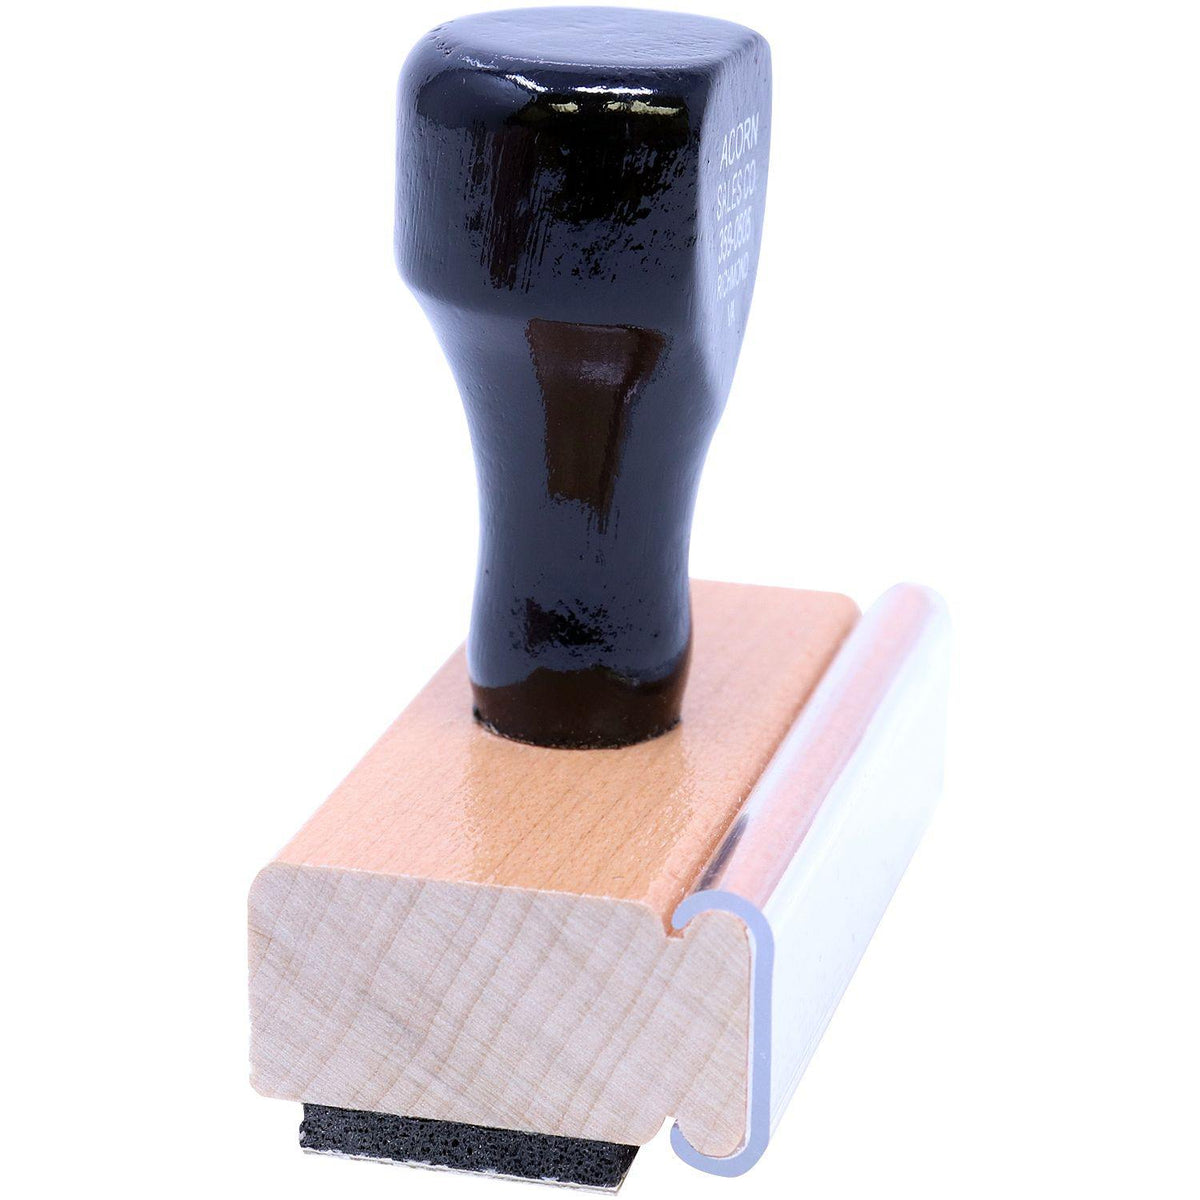 Side View of Bold Shred Rubber Stamp at an Angle